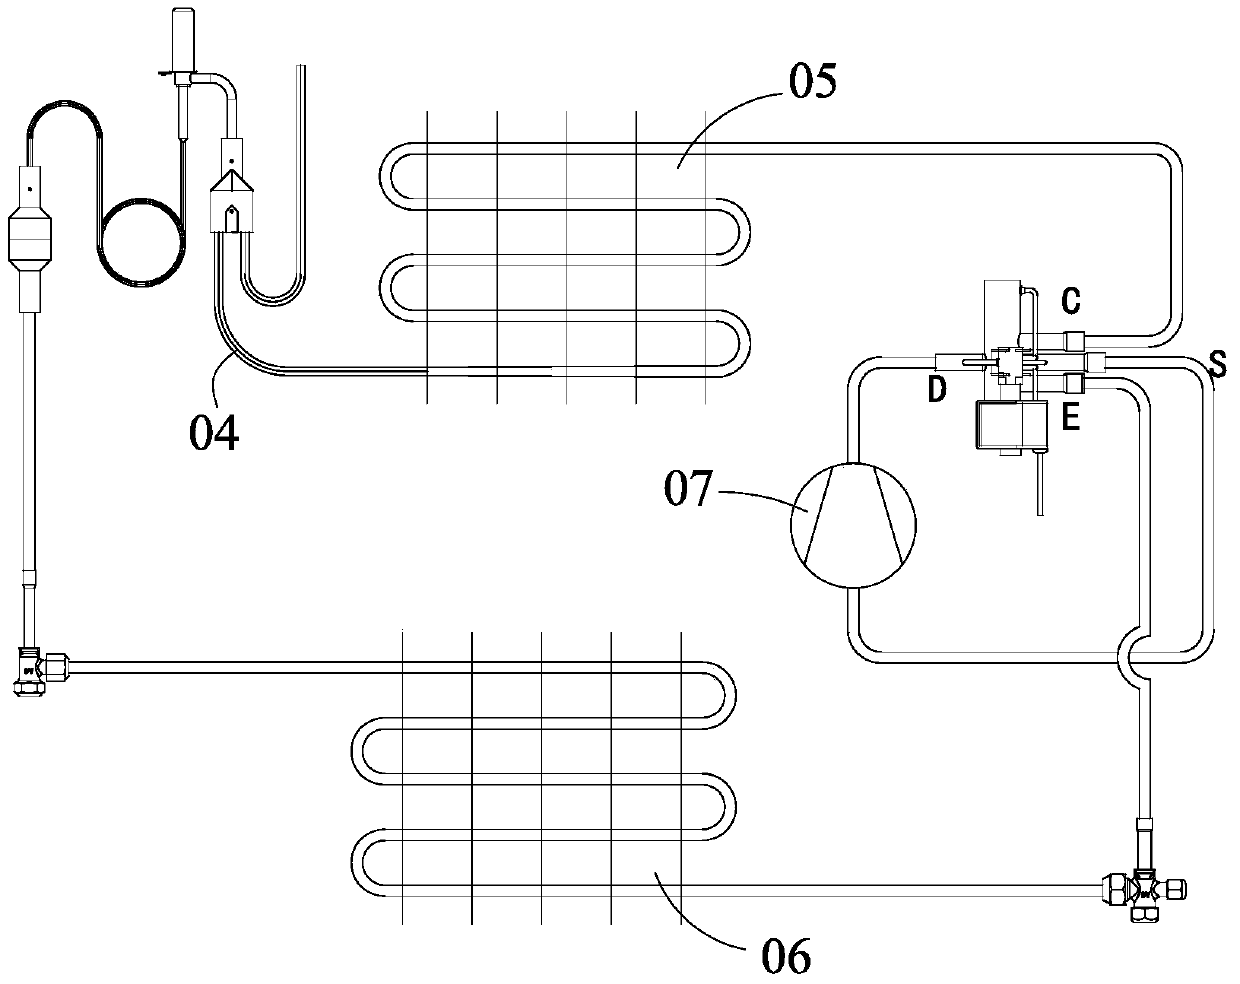 Electronic expansion valve for air-conditioning system and its air-conditioning system